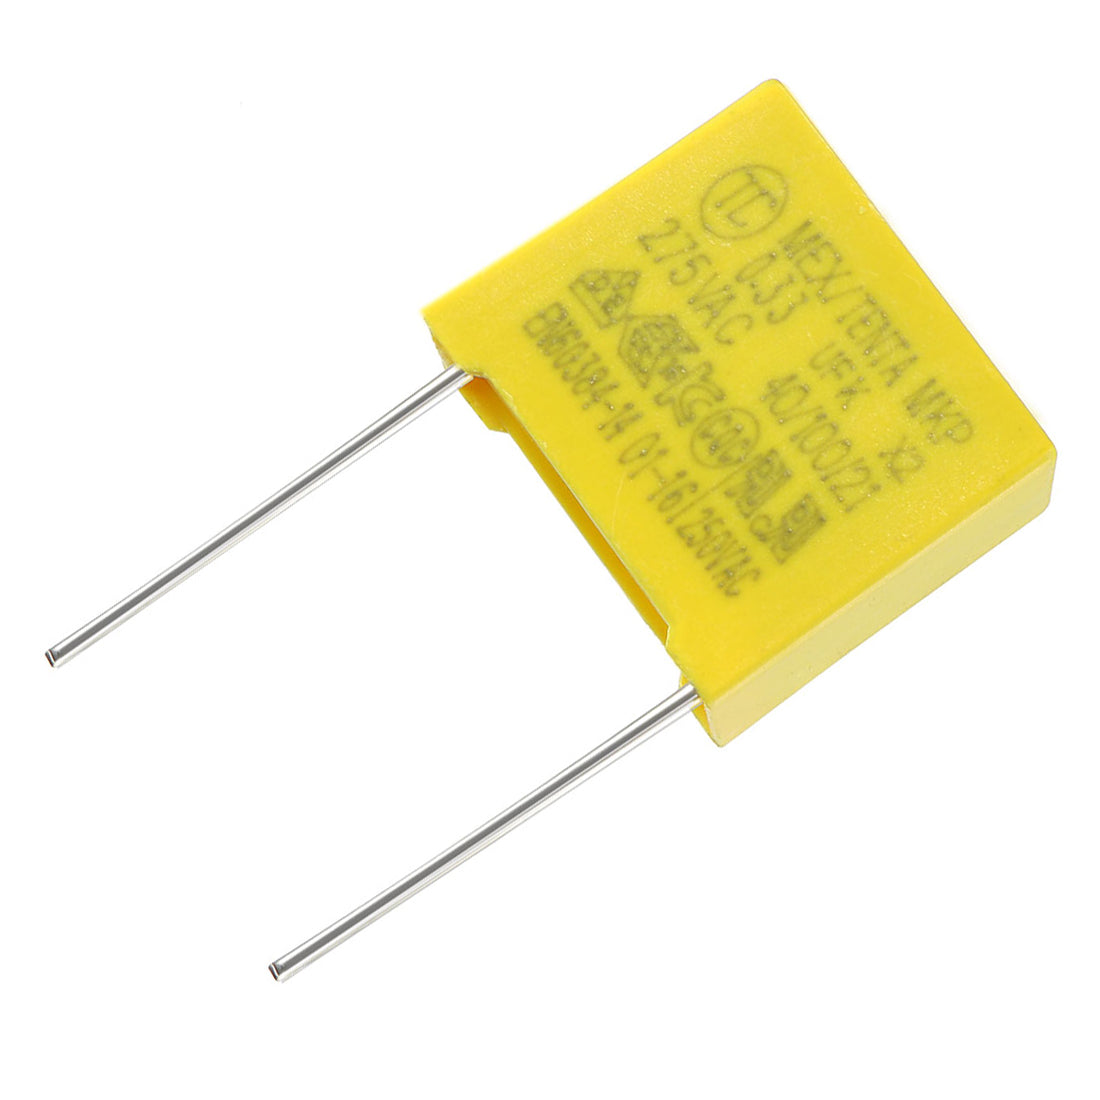 uxcell Uxcell Safety Capacitors Polypropylene Film 0.33uF 275VAC X2 MKP 15mm Pin Pitch 5 Pcs